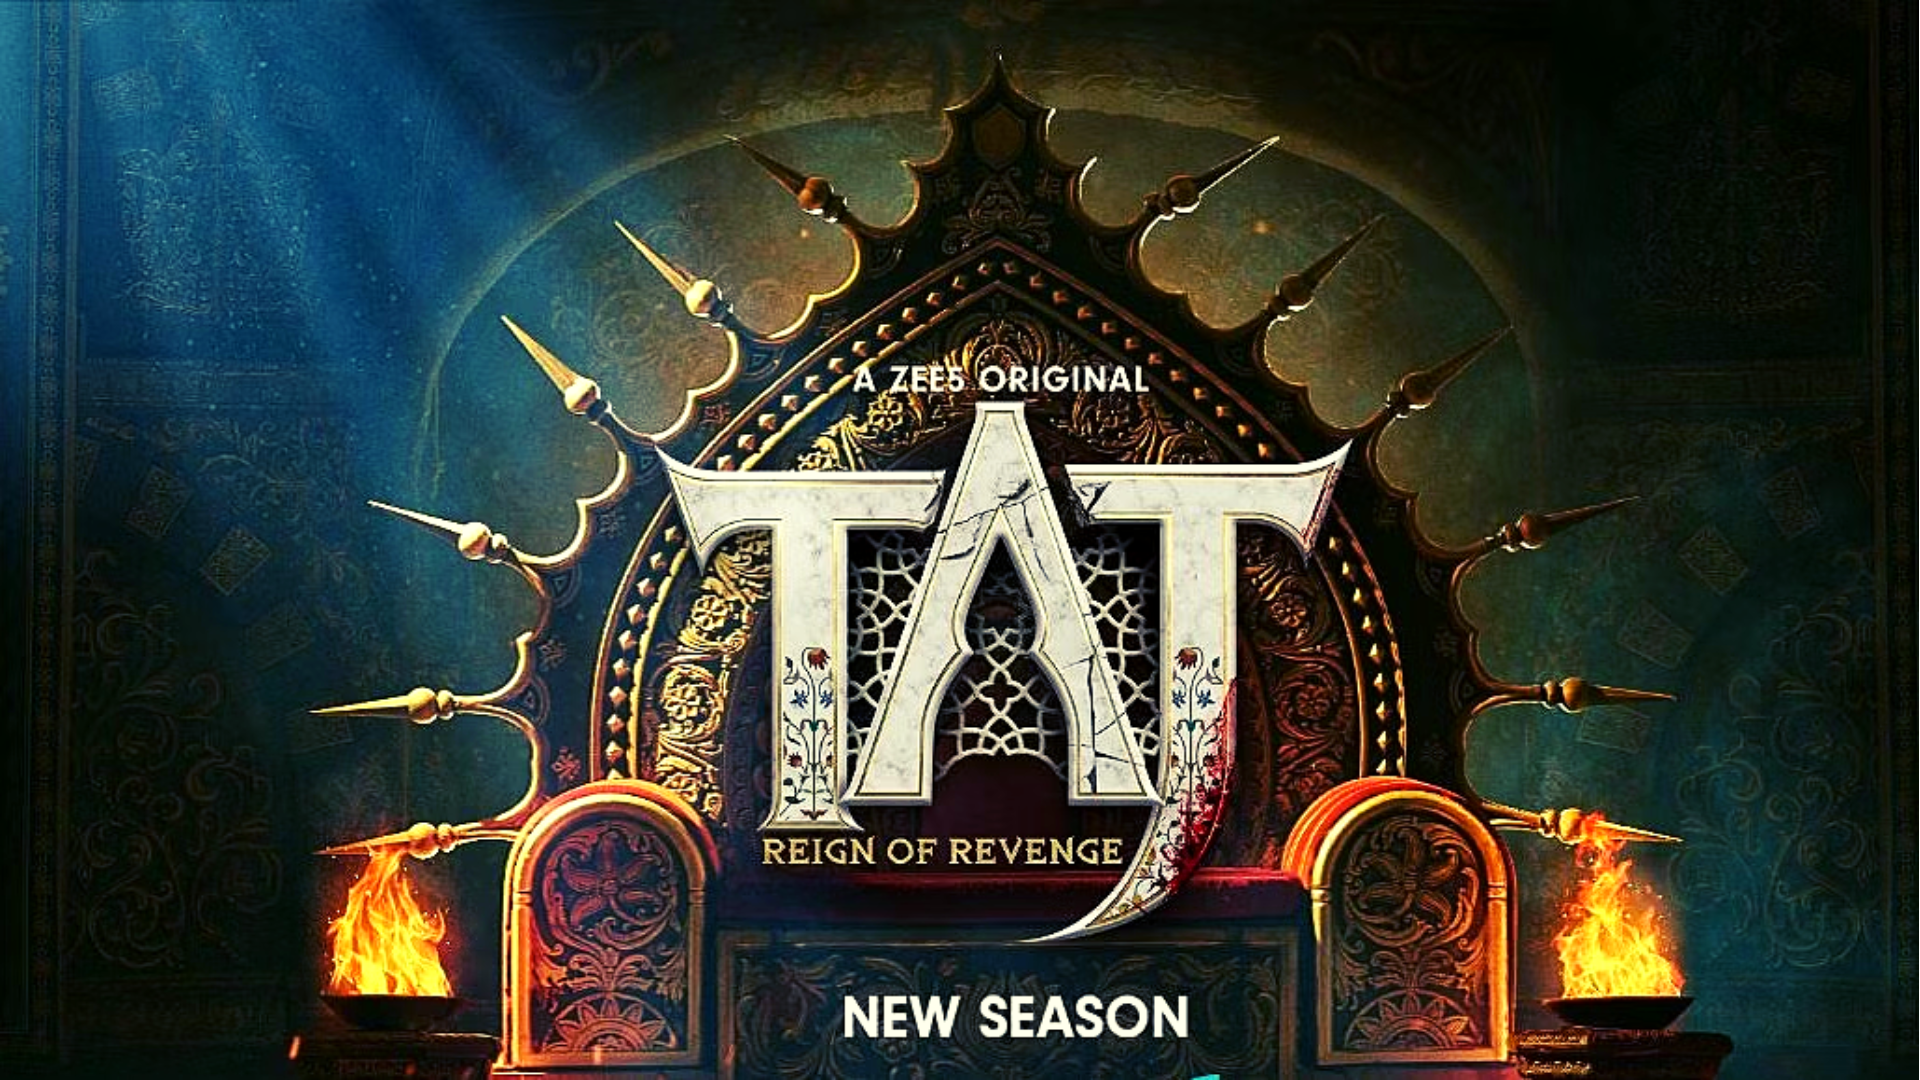 How To Watch Taj: Reign Of Revenge Series Online For Free?